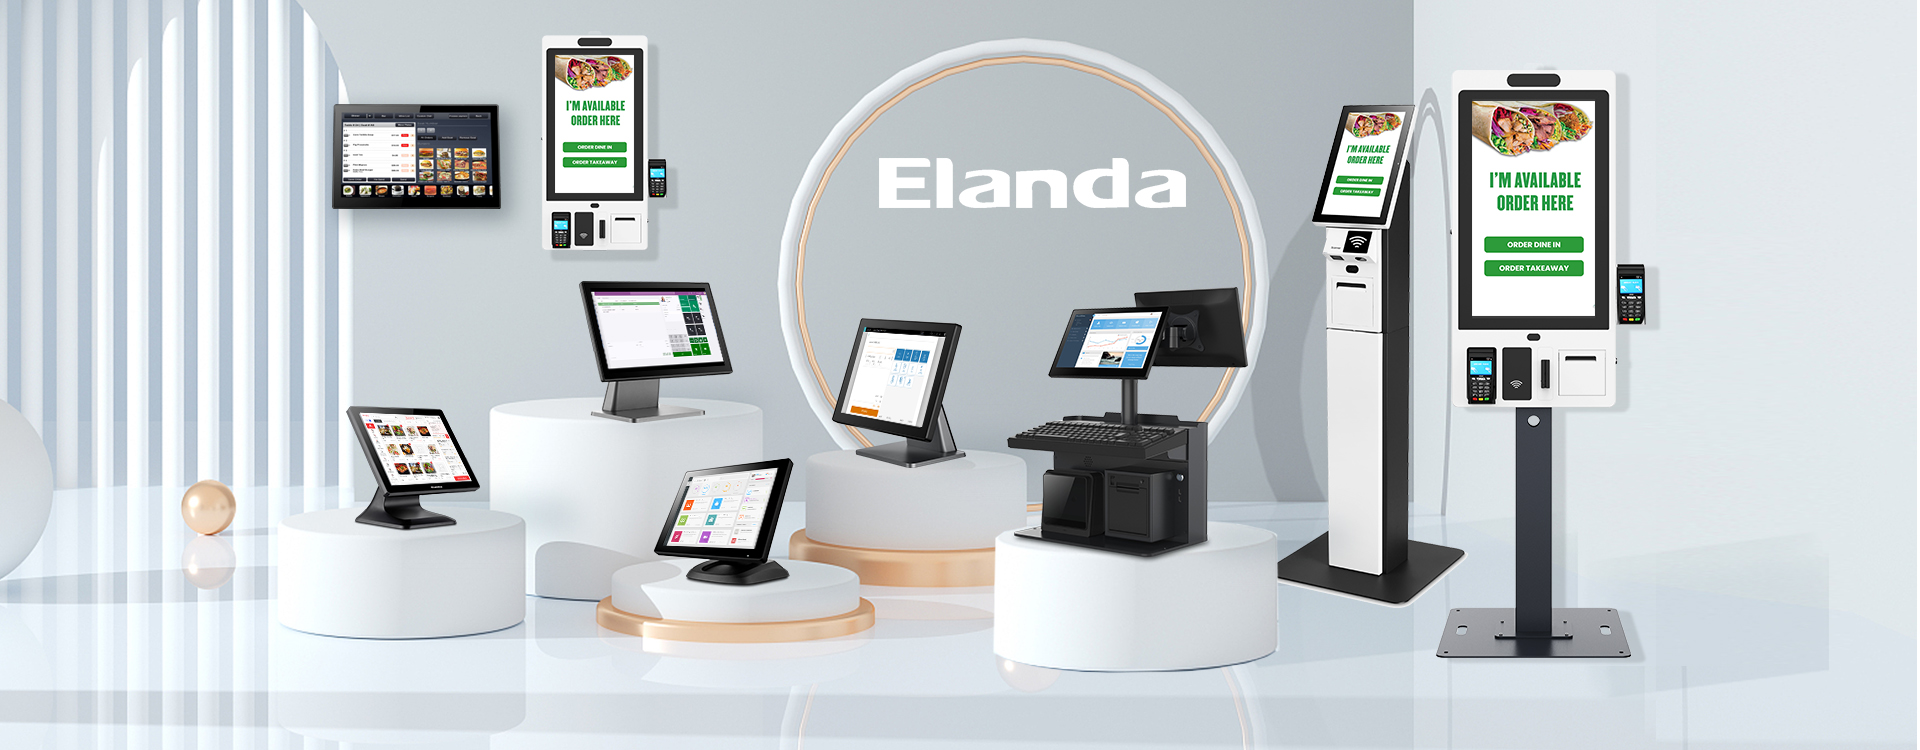 POS systems, self-service kiosks, digital signage, and peripherals